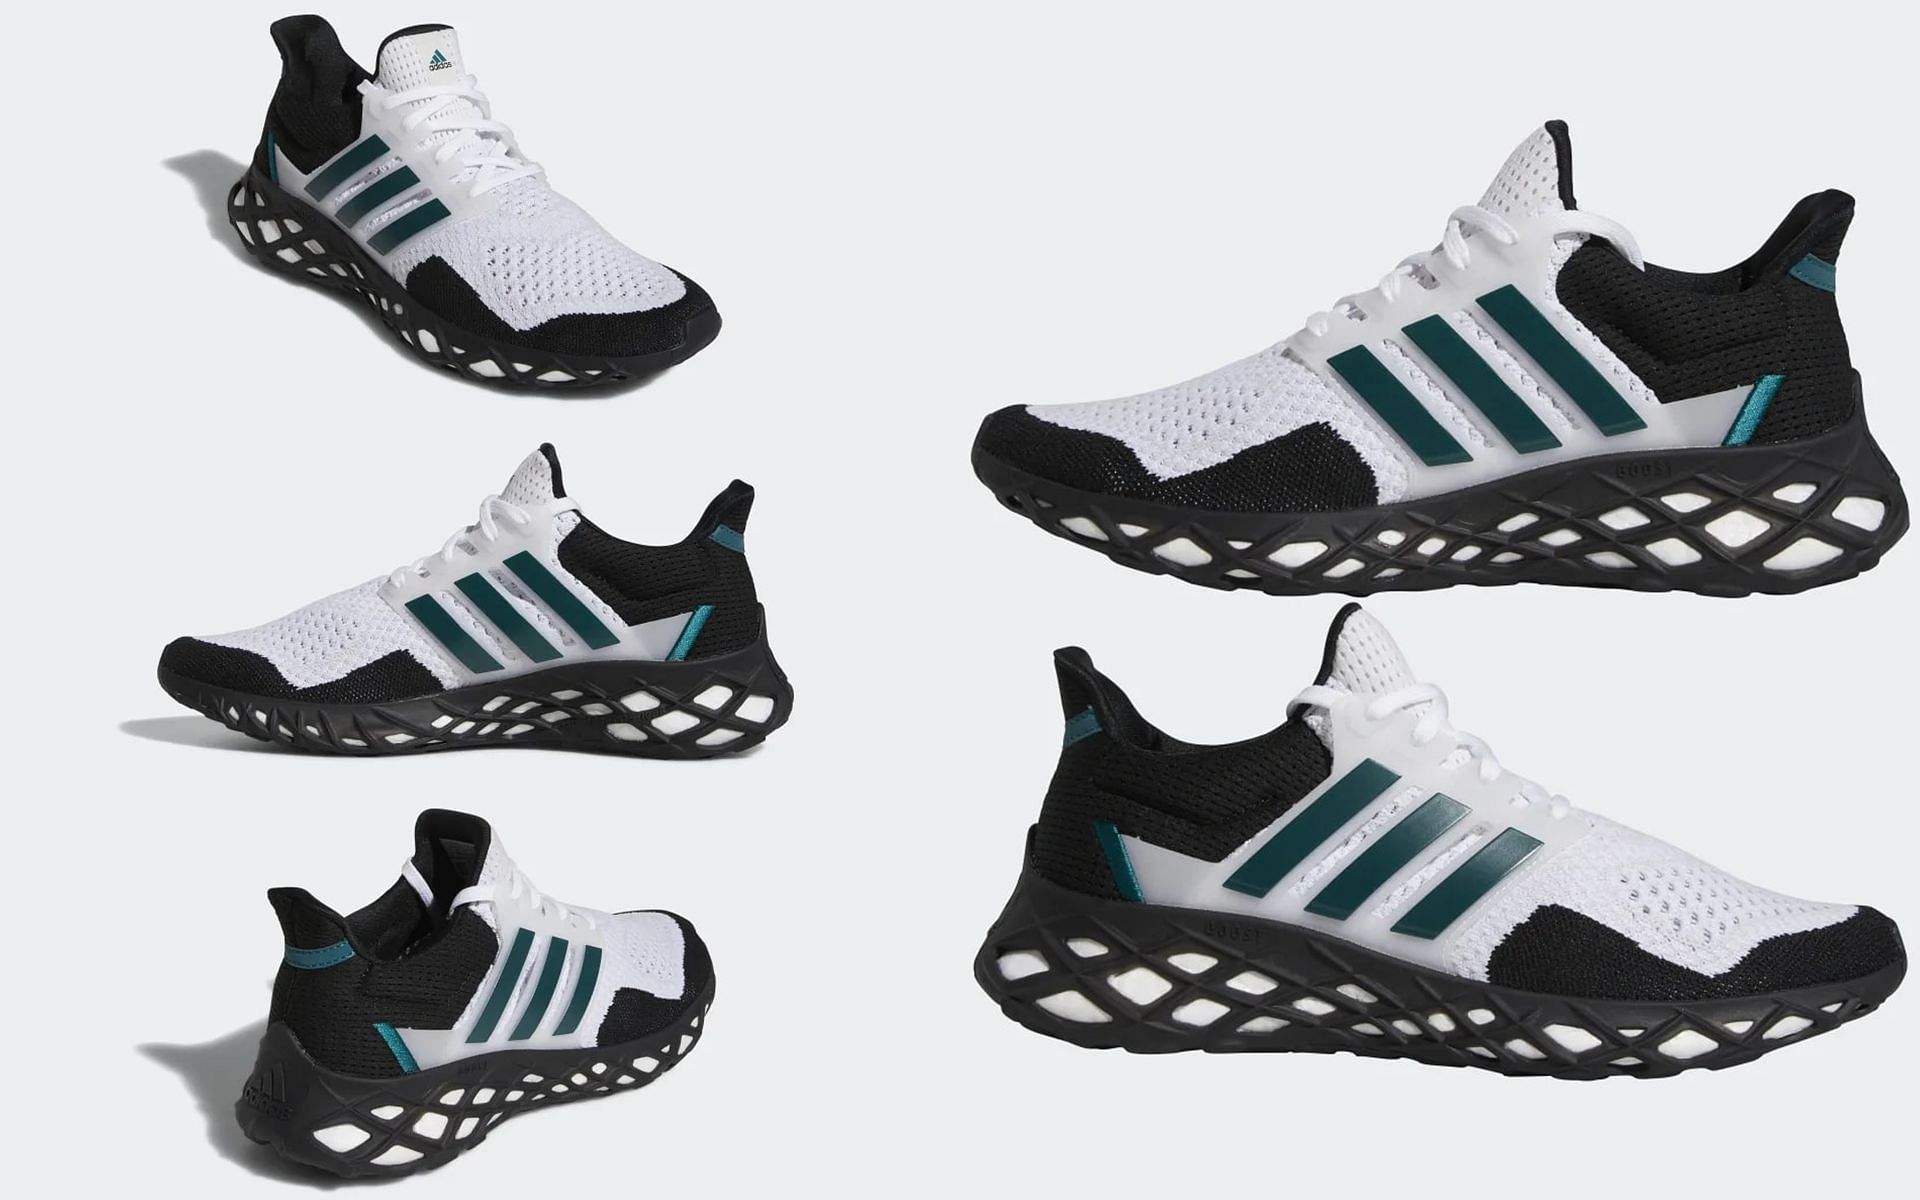 Adidas UltraBOOST Web Dna in Legacy Teal/Cloud White/ Core Black colorway (Image via Adidas)